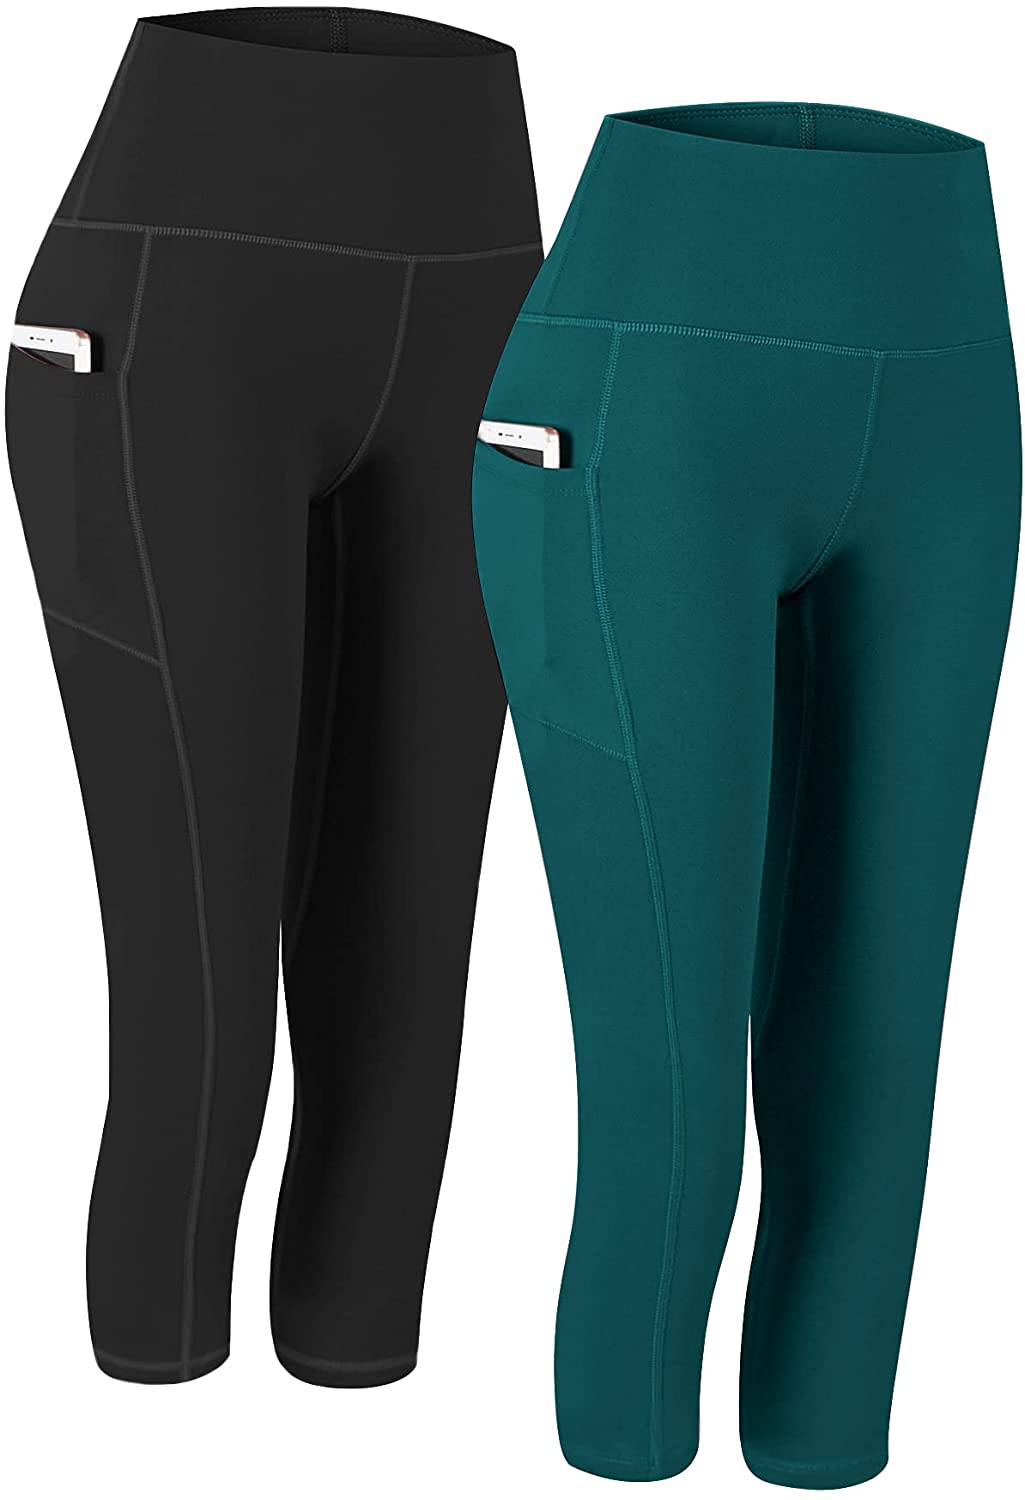 Our Point of View on Fengbay High Waist Yoga Pants From